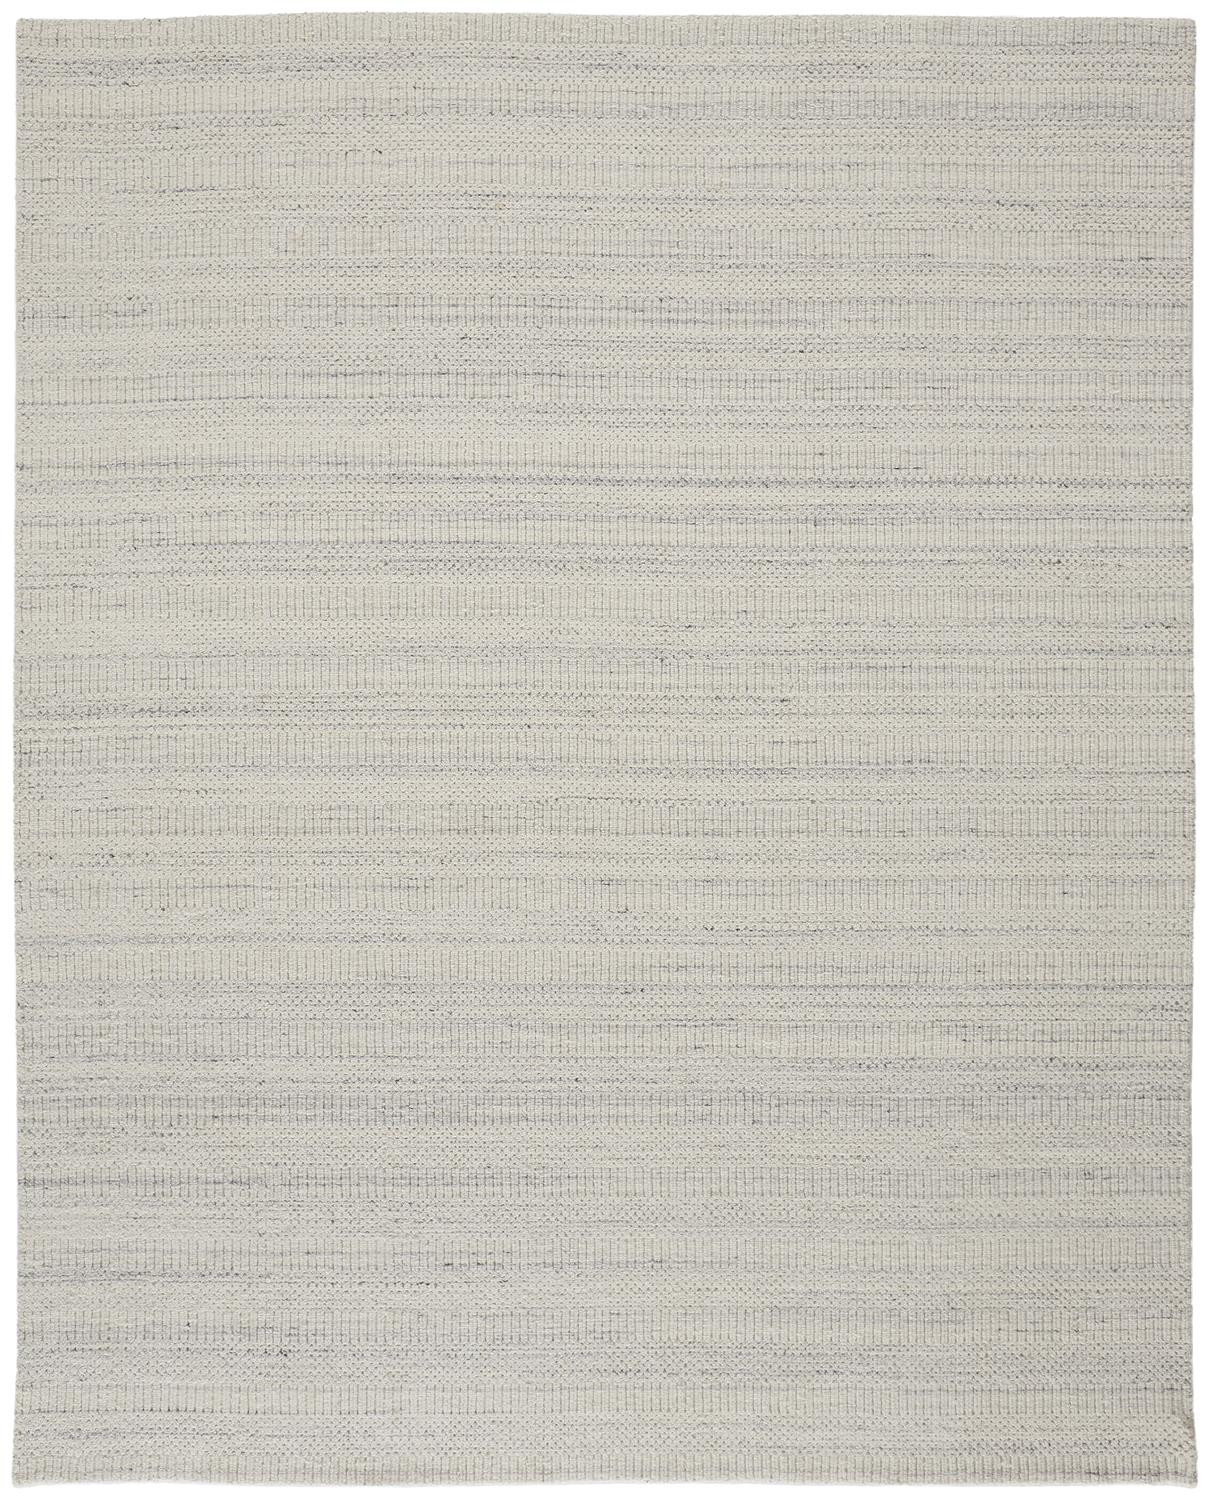 10' X 14' Ivory And Gray Wool Hand Woven Stain Resistant Area Rug-514060-1